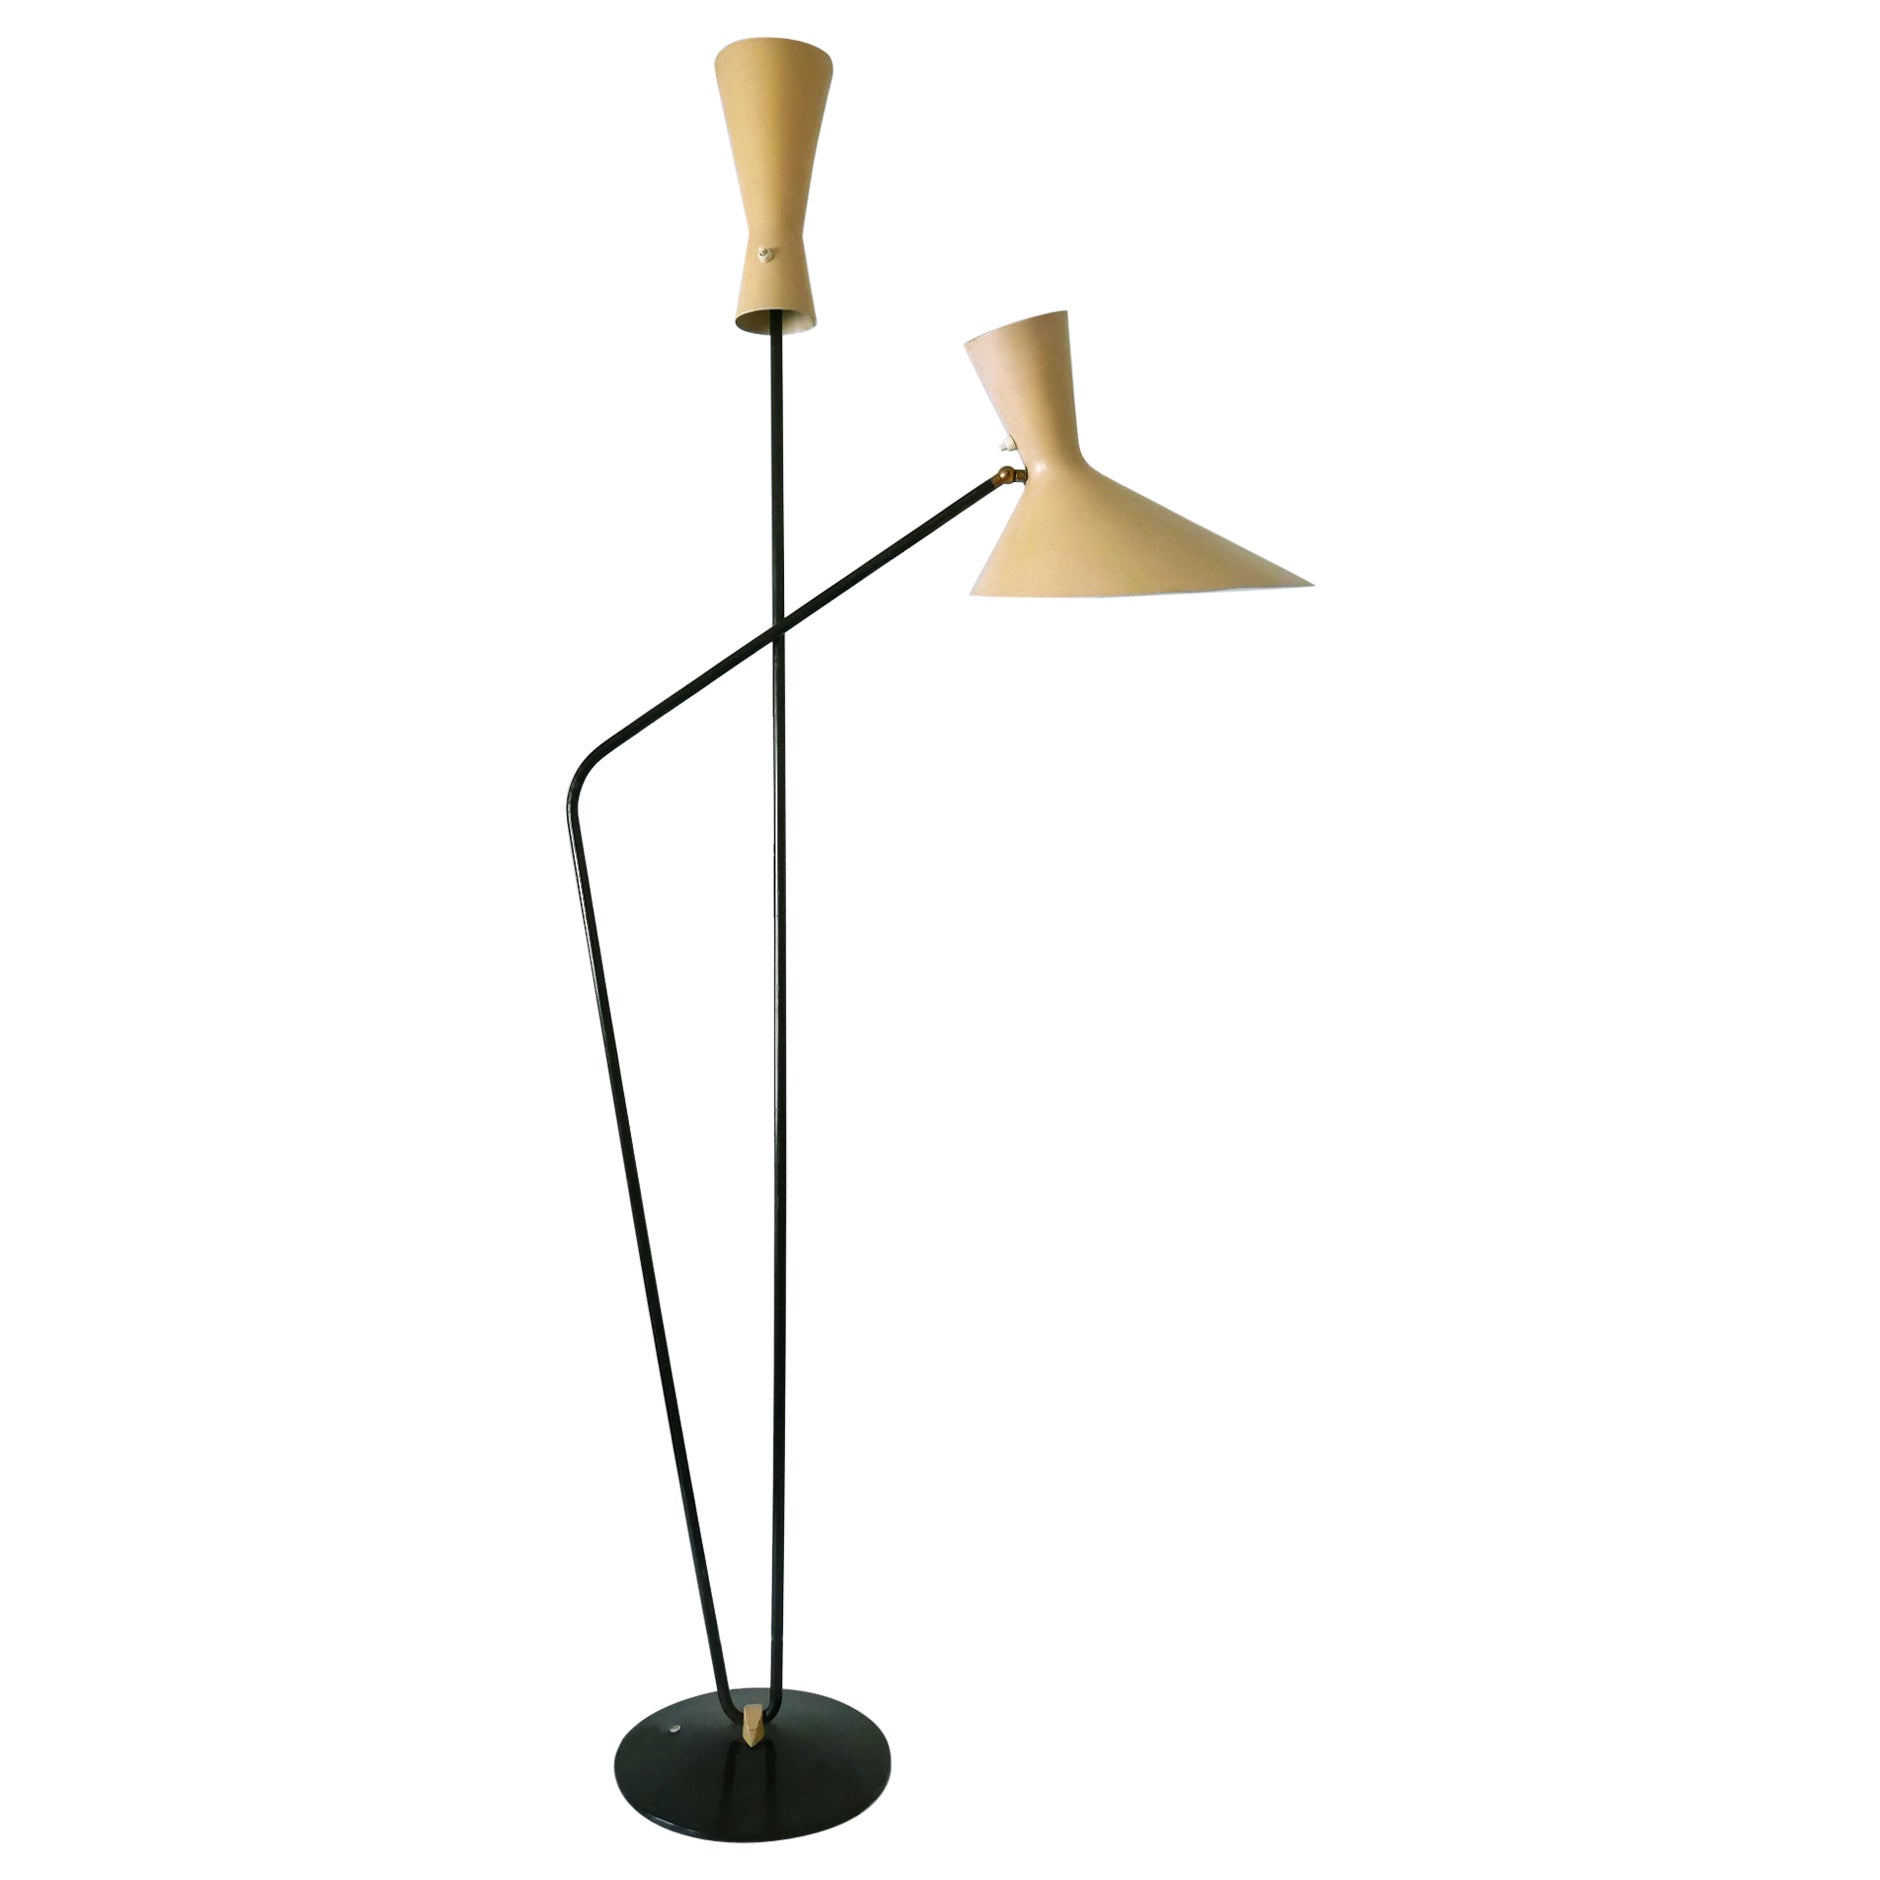 Rare Iconic Mid-Century Modern Floor Lamp by Prof. Carl Moor for BAG Turgi 1950s